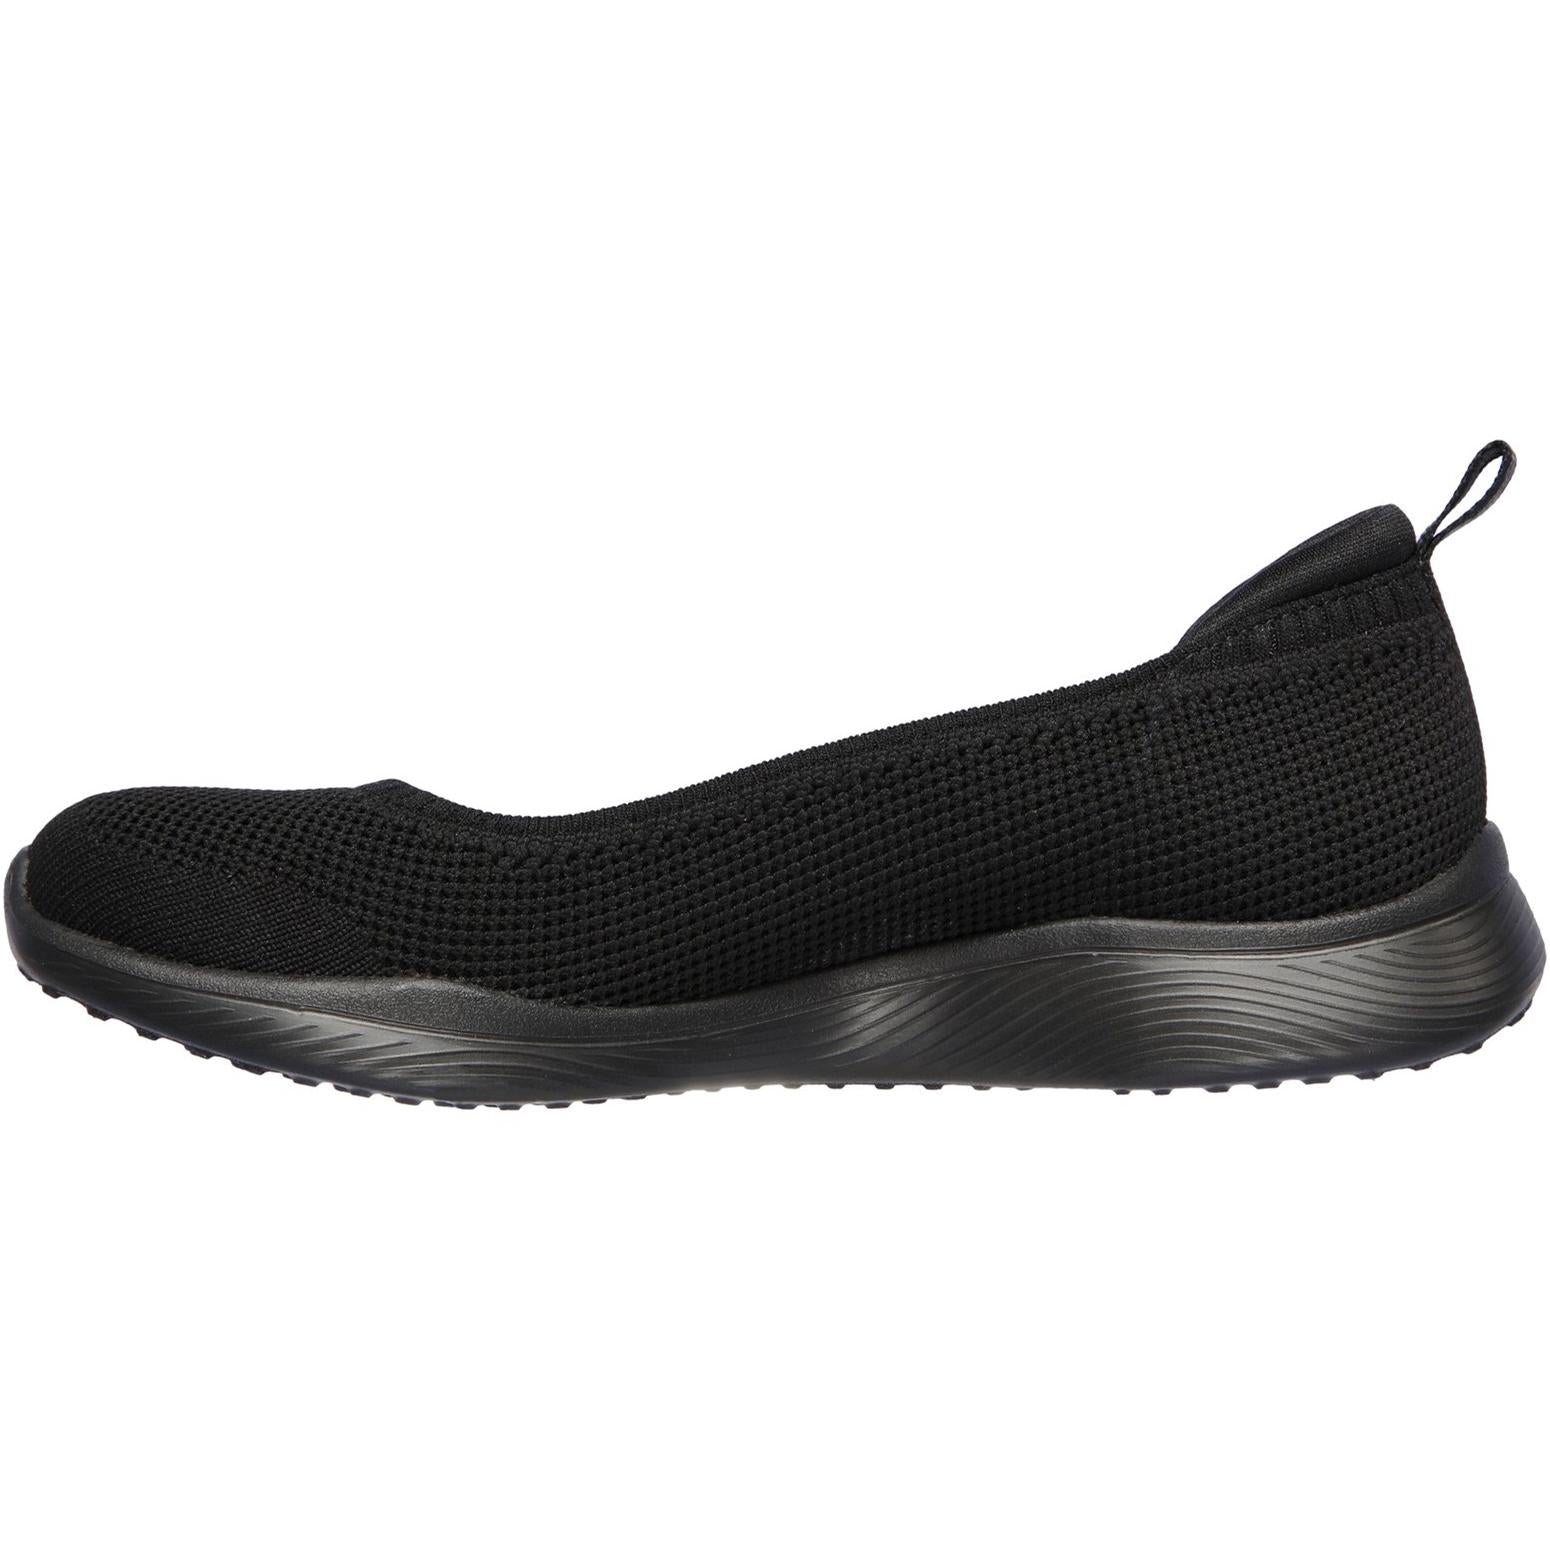 Skechers Microburst 2.0 Be Iconic Wide Sports Shoe